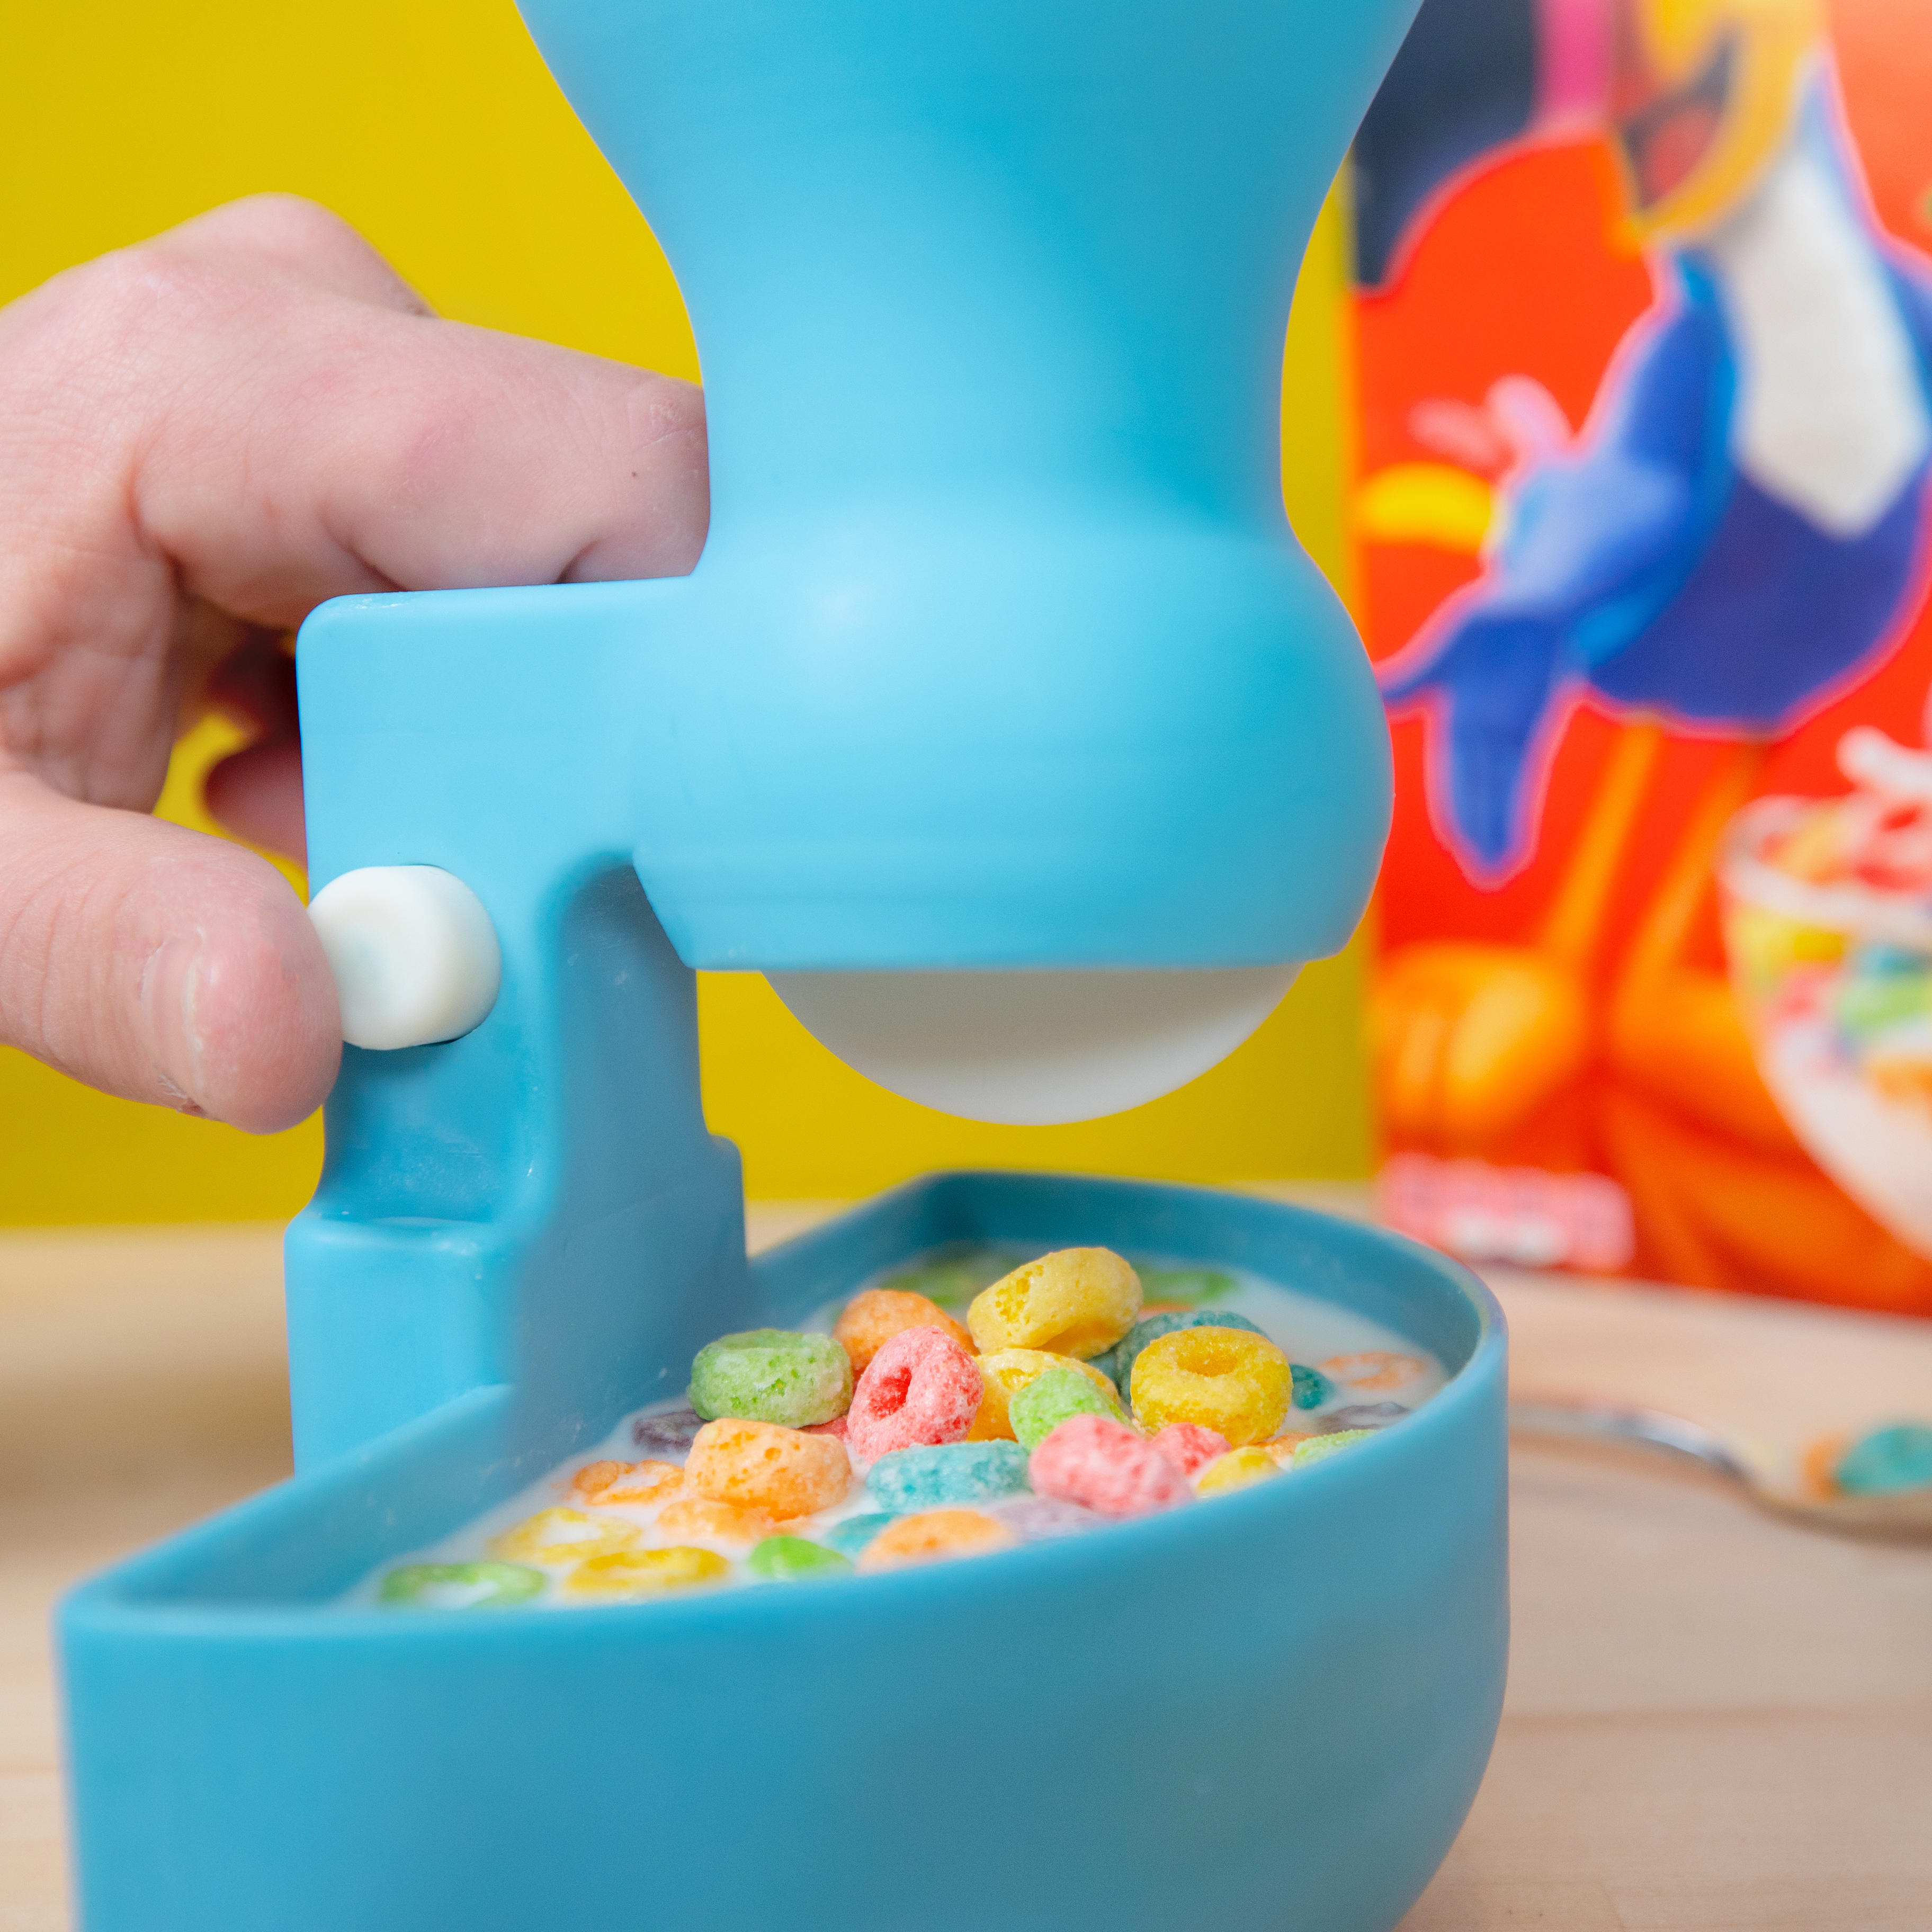 Nickelodeon, Paw Patrol - Anti Soggy Cereal Bowl for Keeping your Cereal  Crunchy - Just Crunch Never Soggy Bowls for Cereal and Milk, Ice Cream